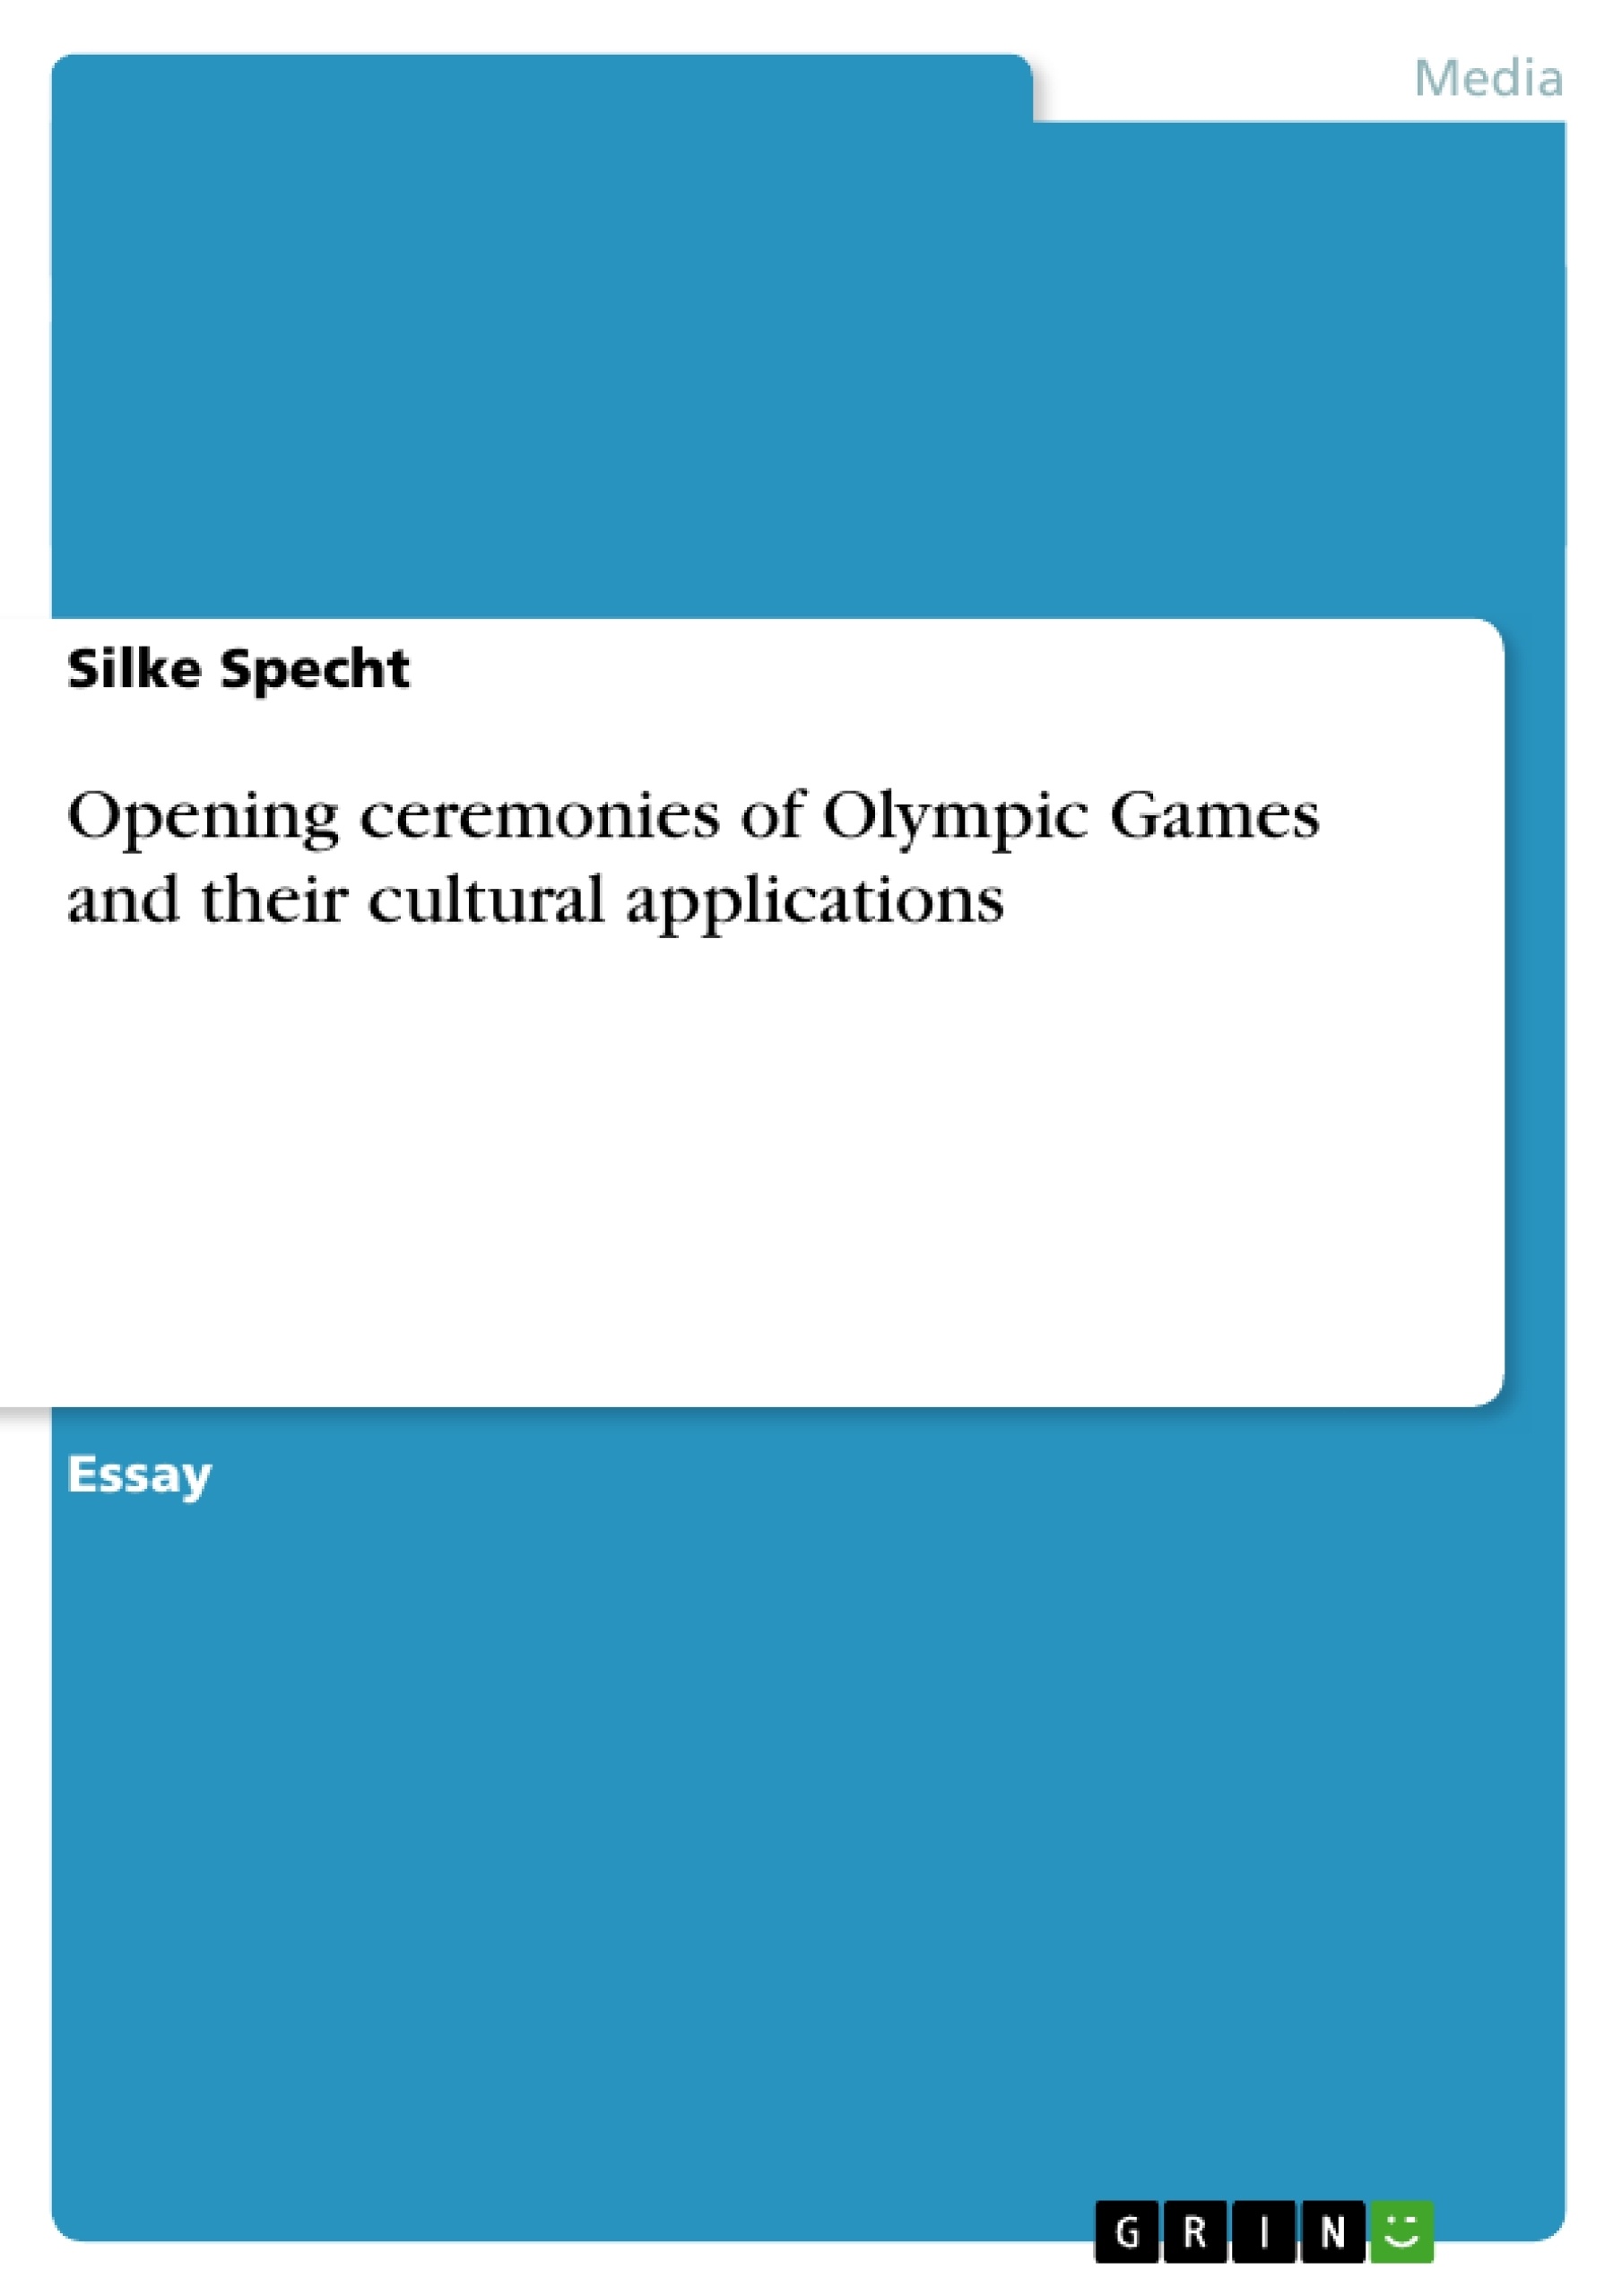 The olympic games essay